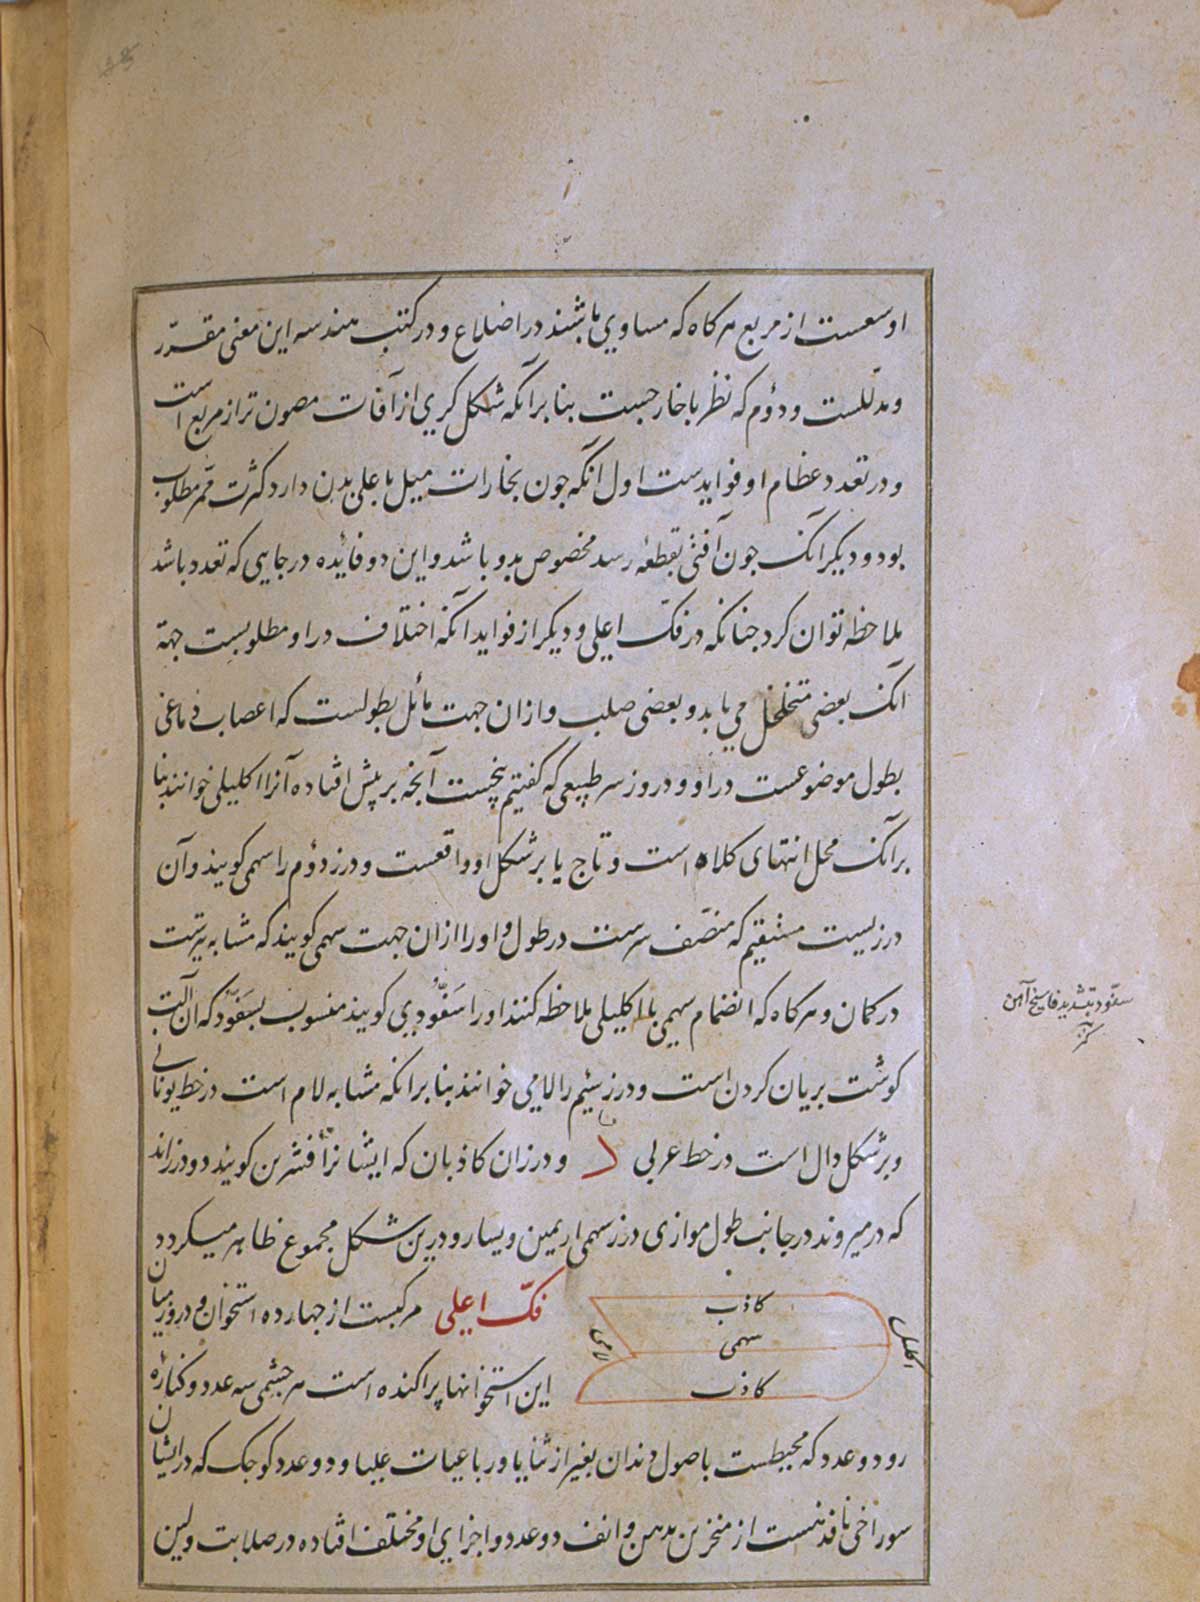 Folio 7b of Mansur ibn Ilyas' Tashrih-i badan-i insan, featuring a diagram of the cranial sutures, drawn in red and black ink.